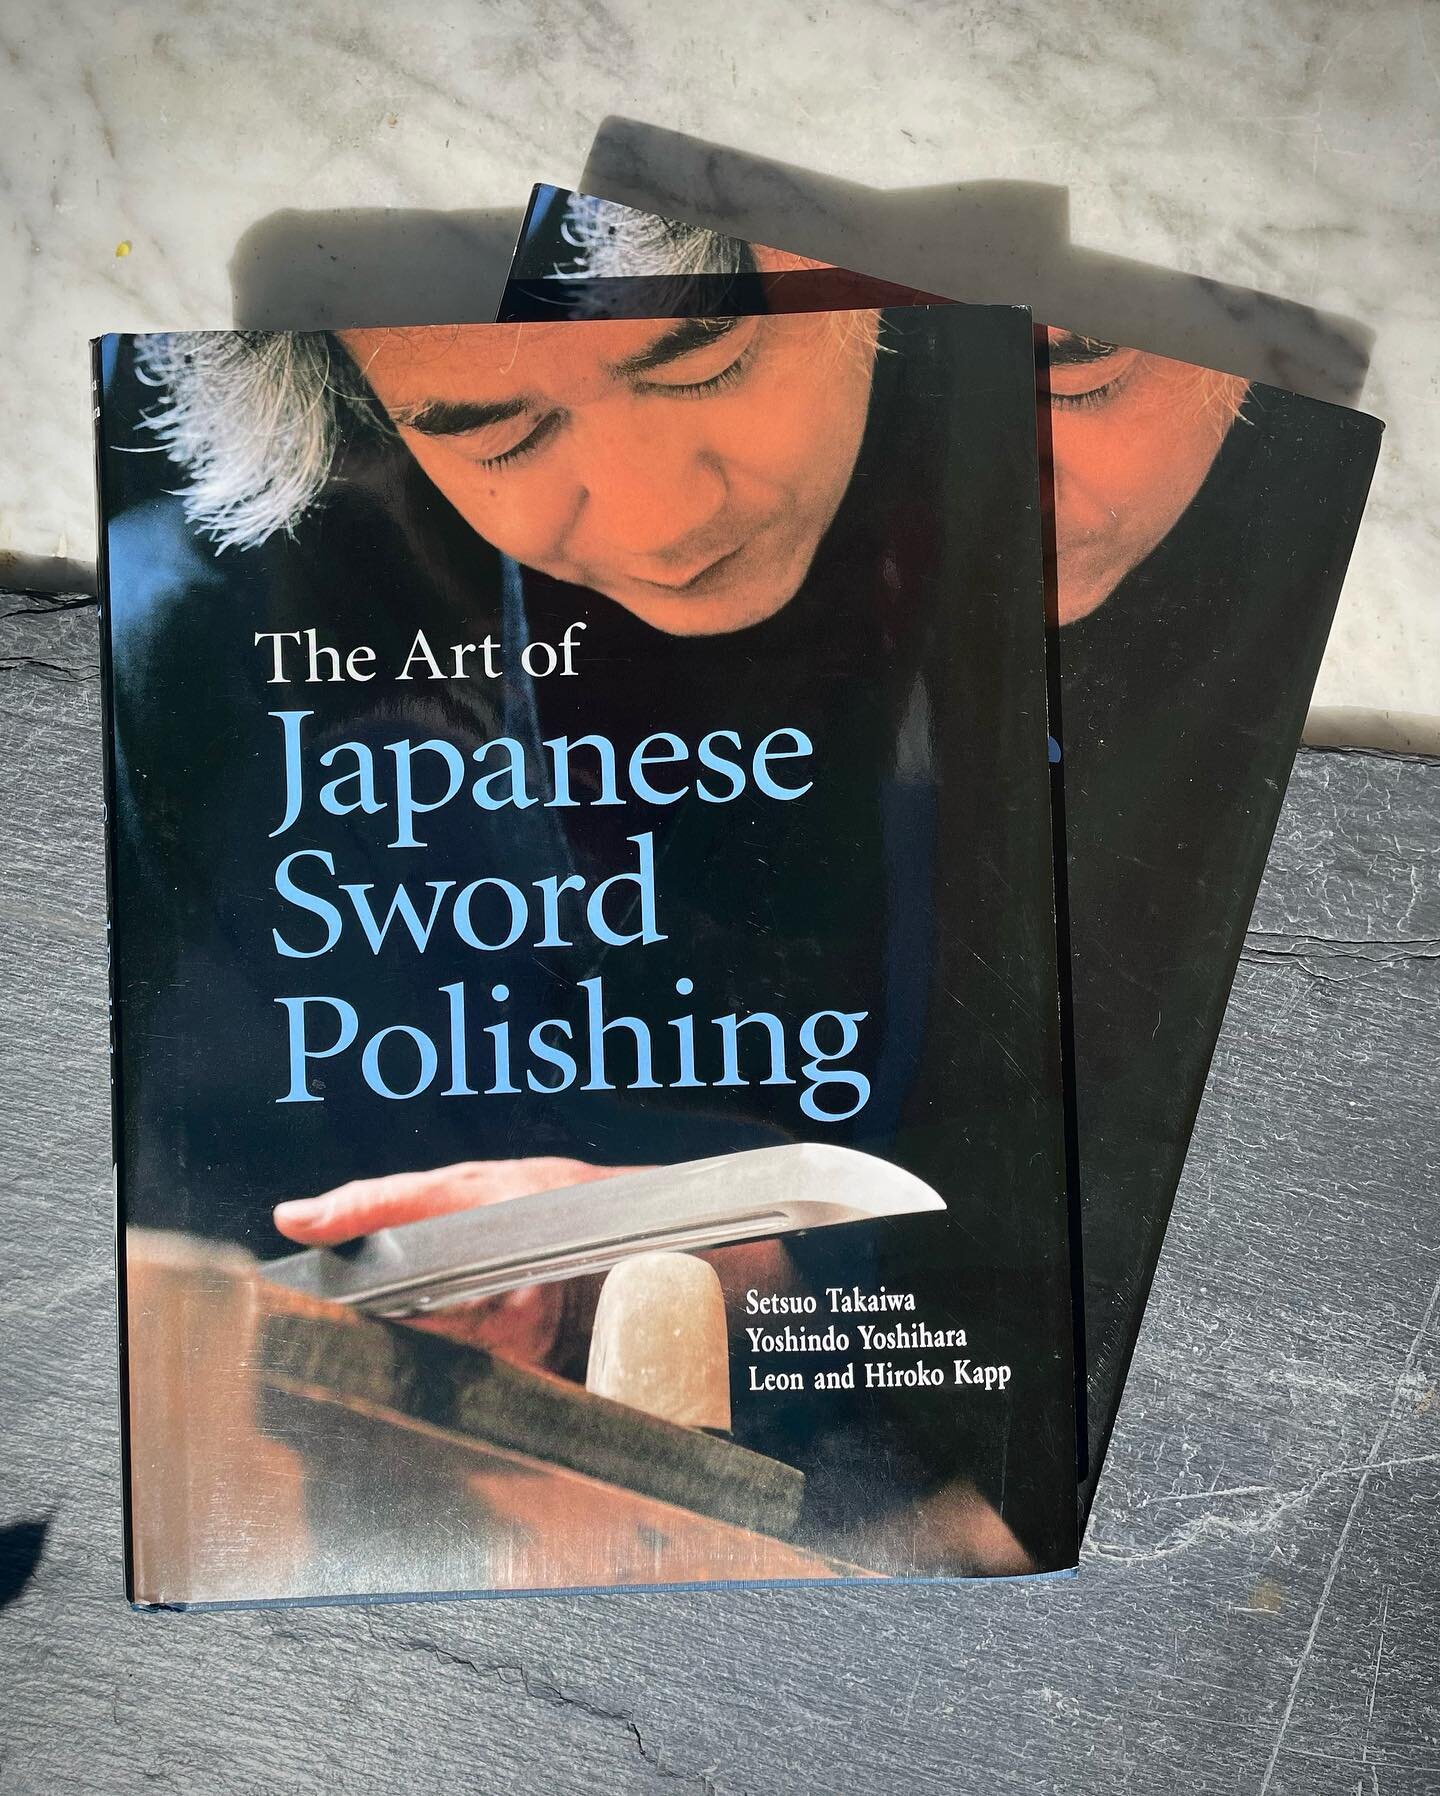 By the miracle combination of Amazon (thanks Jeff) and @barmondspecialsteels (thanks Richard) I have found myself in the possession of not one but TWO copies of the sword polishing bible &ldquo;The Art of Japanese Sword Polishing&rdquo;.

Which means